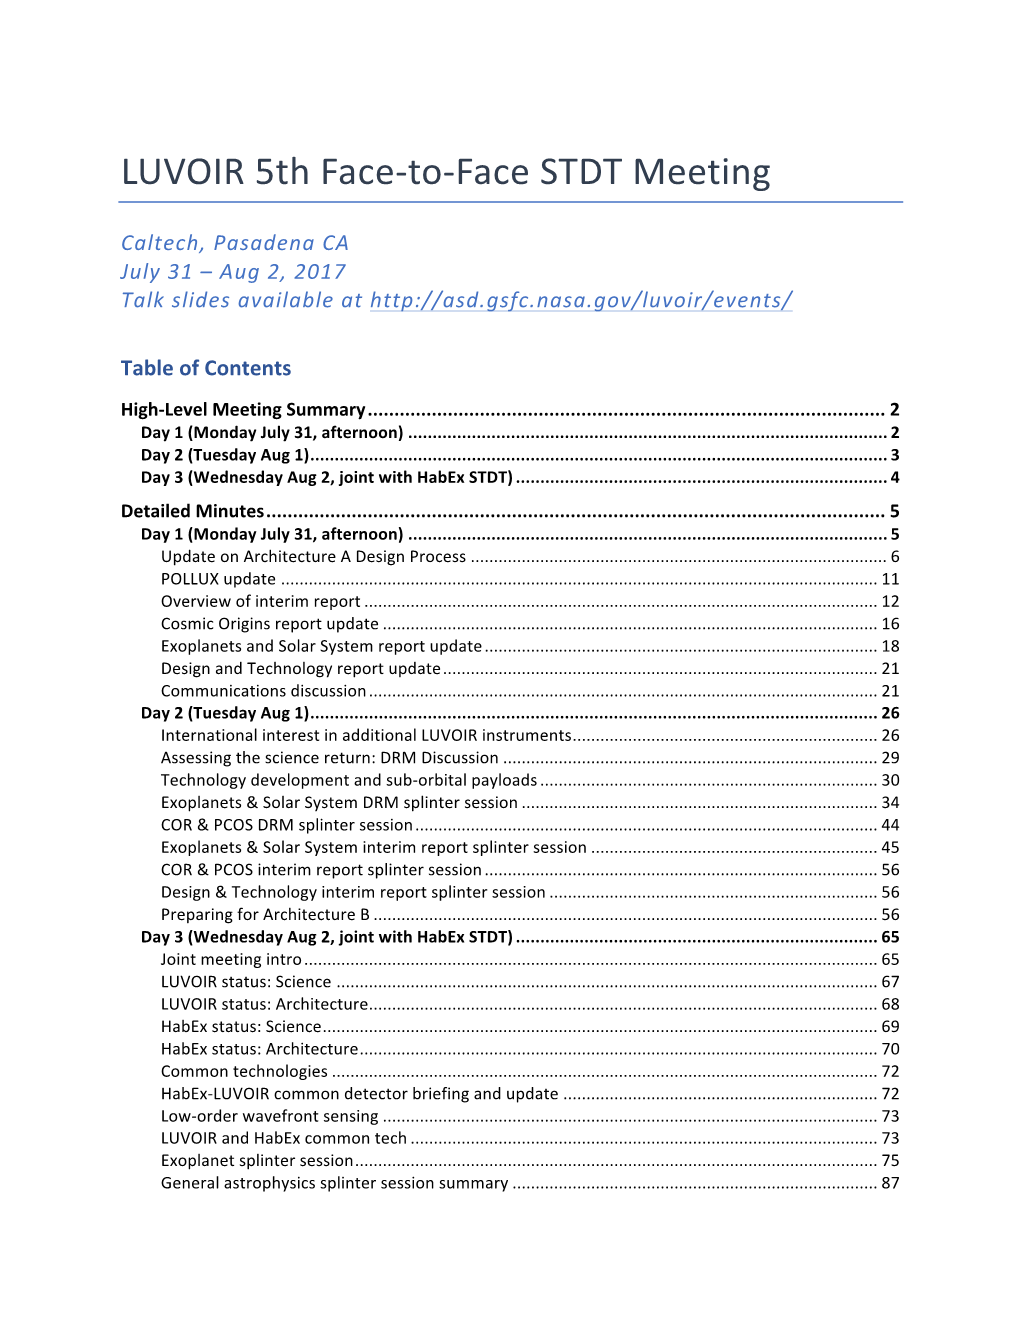 LUVOIR 5Th Face-To-Face STDT Meeting